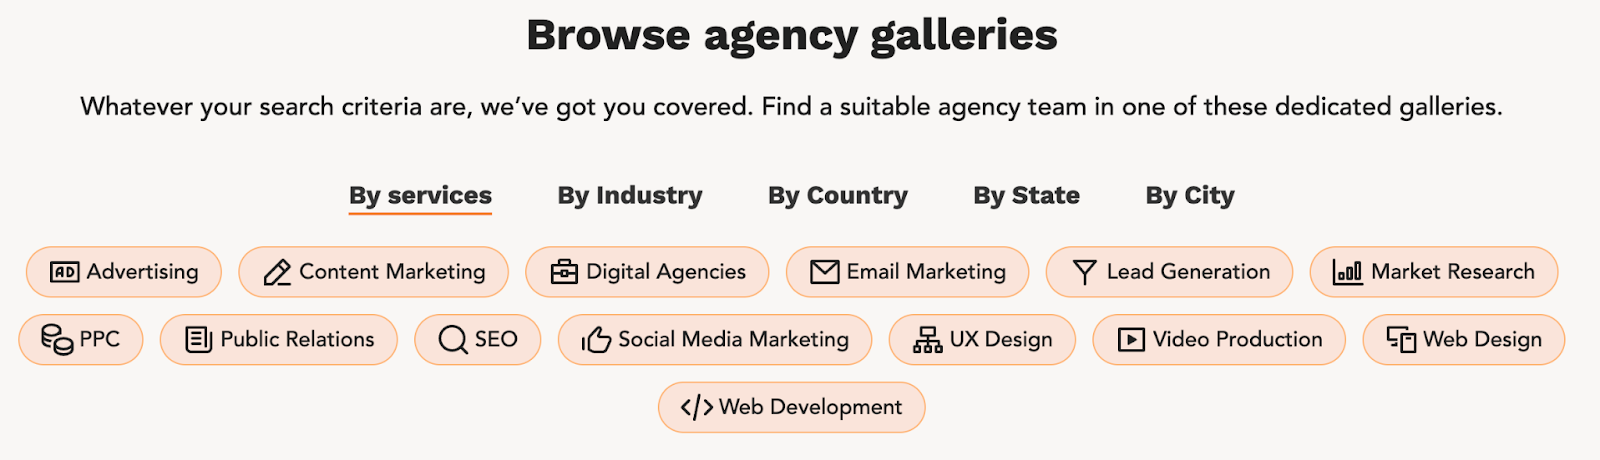 Browse agency galleries section